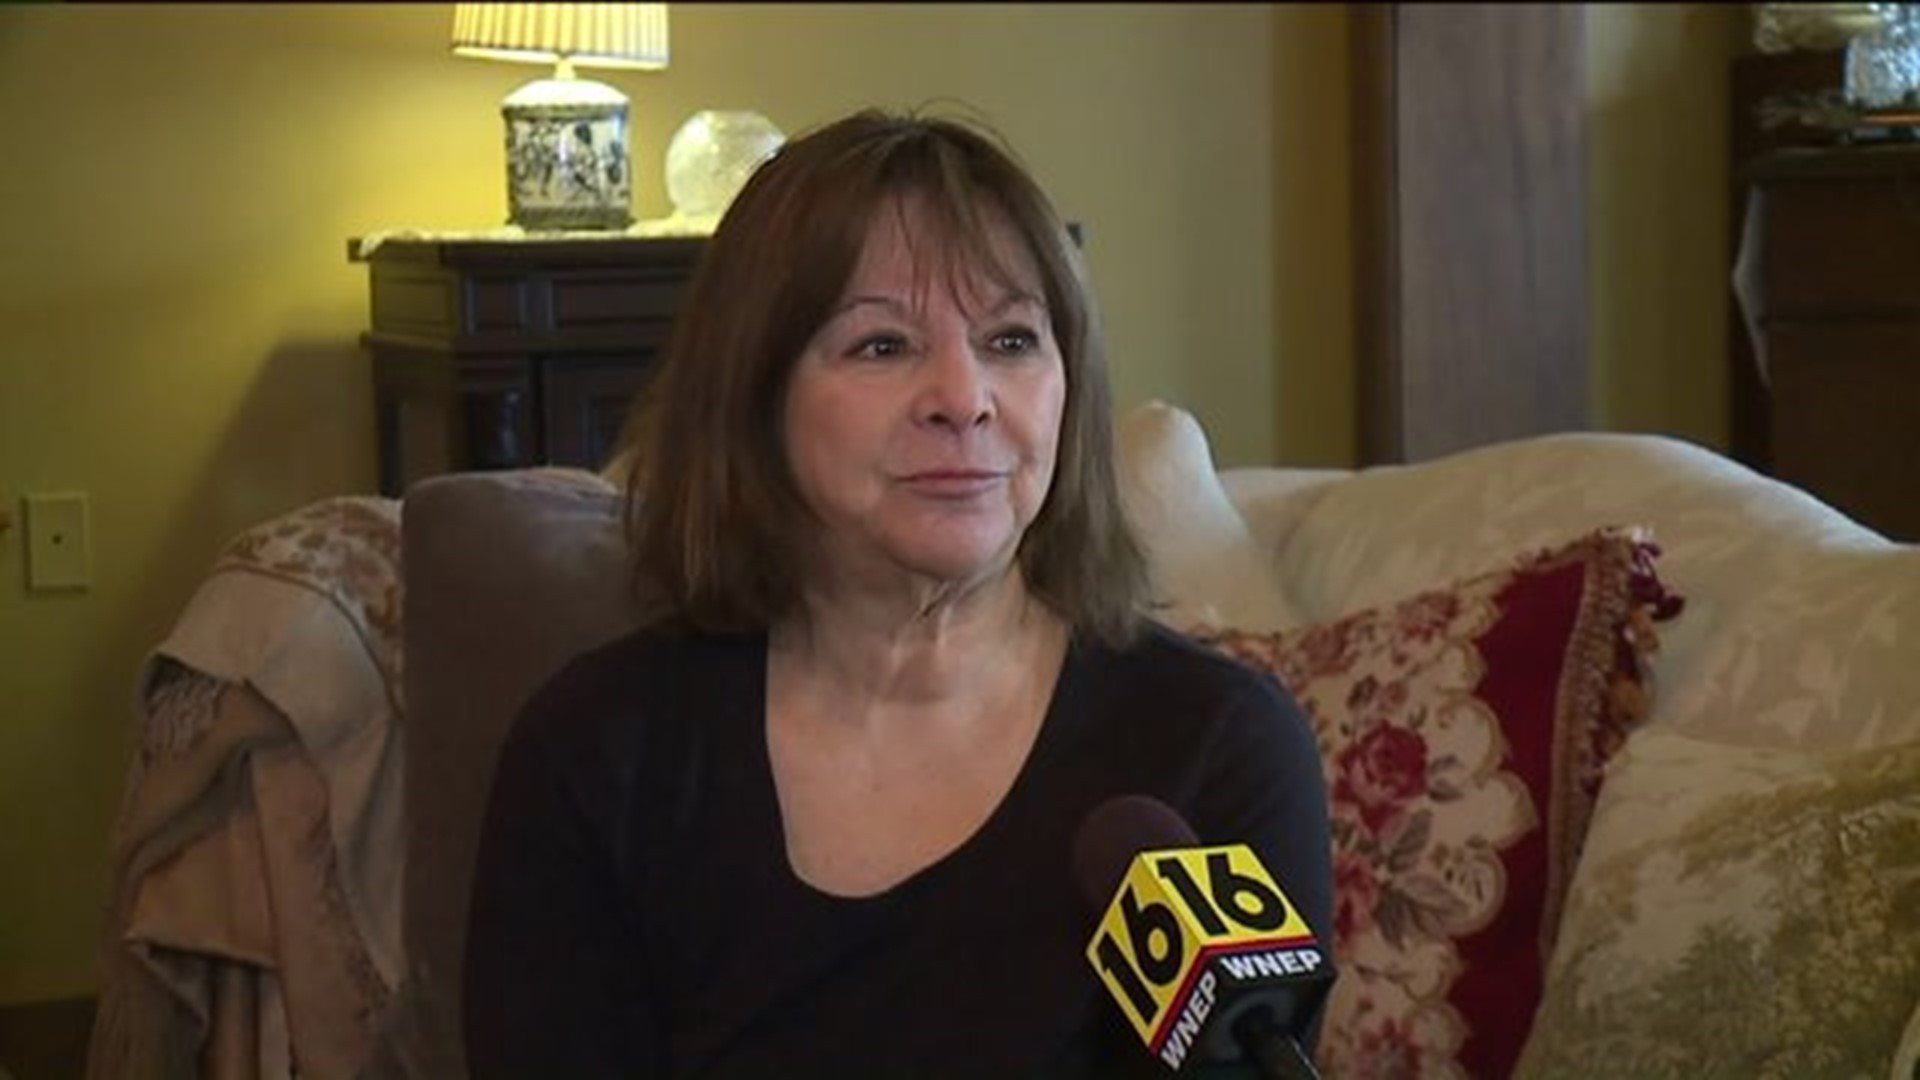 20 Years Later, Woman Describes Effects of Carbon Monoxide